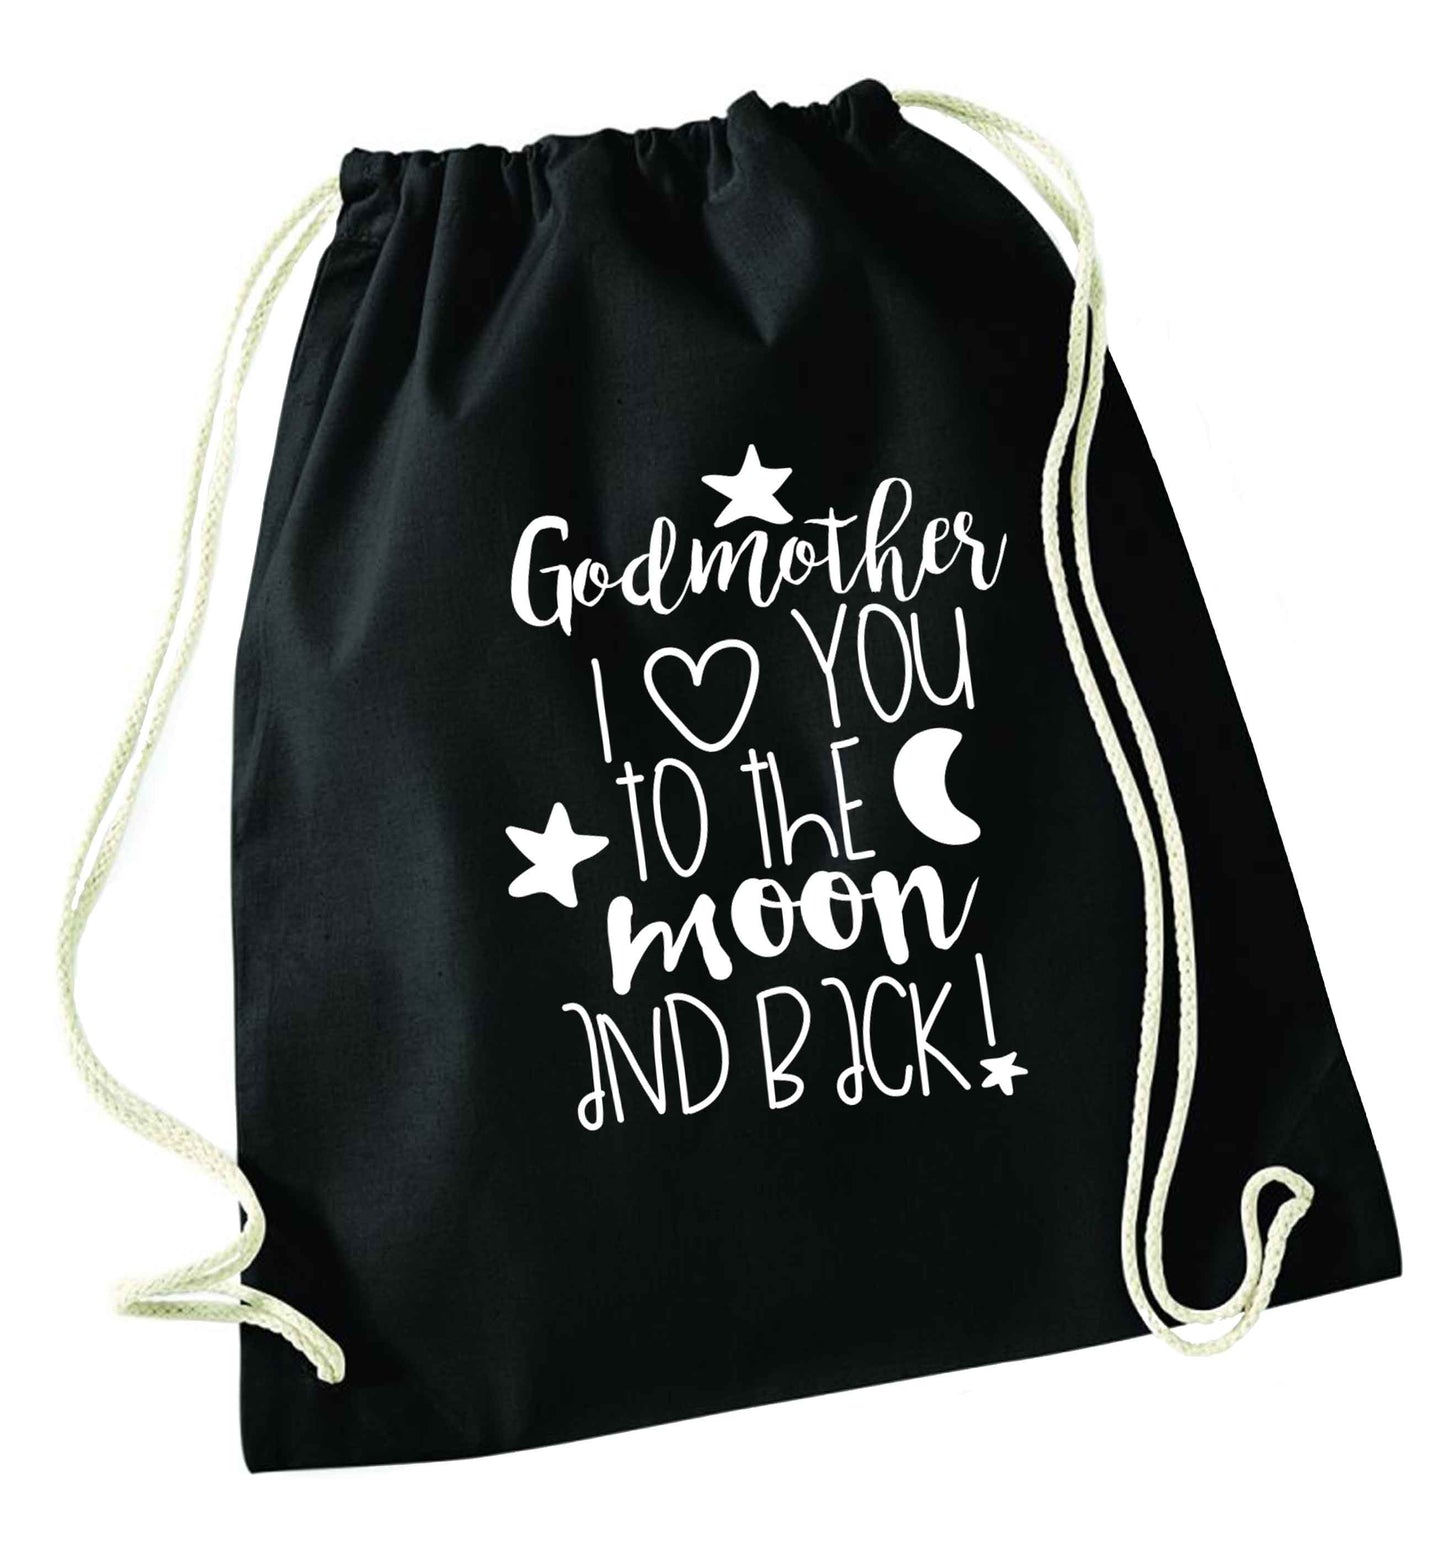 Godmother I love you to the moon and back black drawstring bag